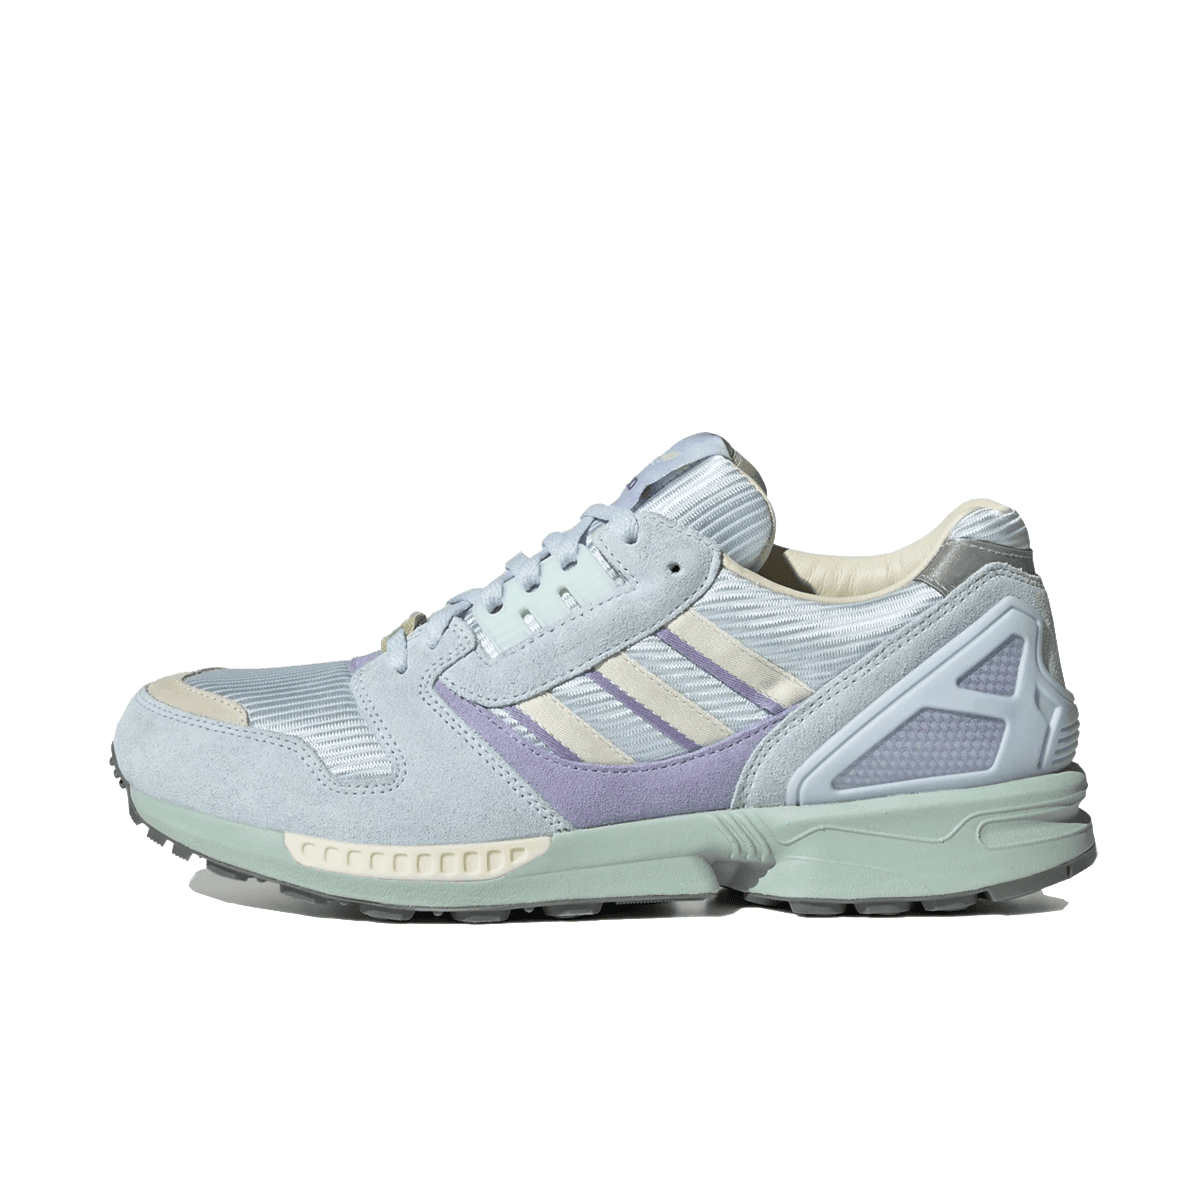 adidas ZX 8000 Bravo Fall of the Wall | M18629 | The Drop Date